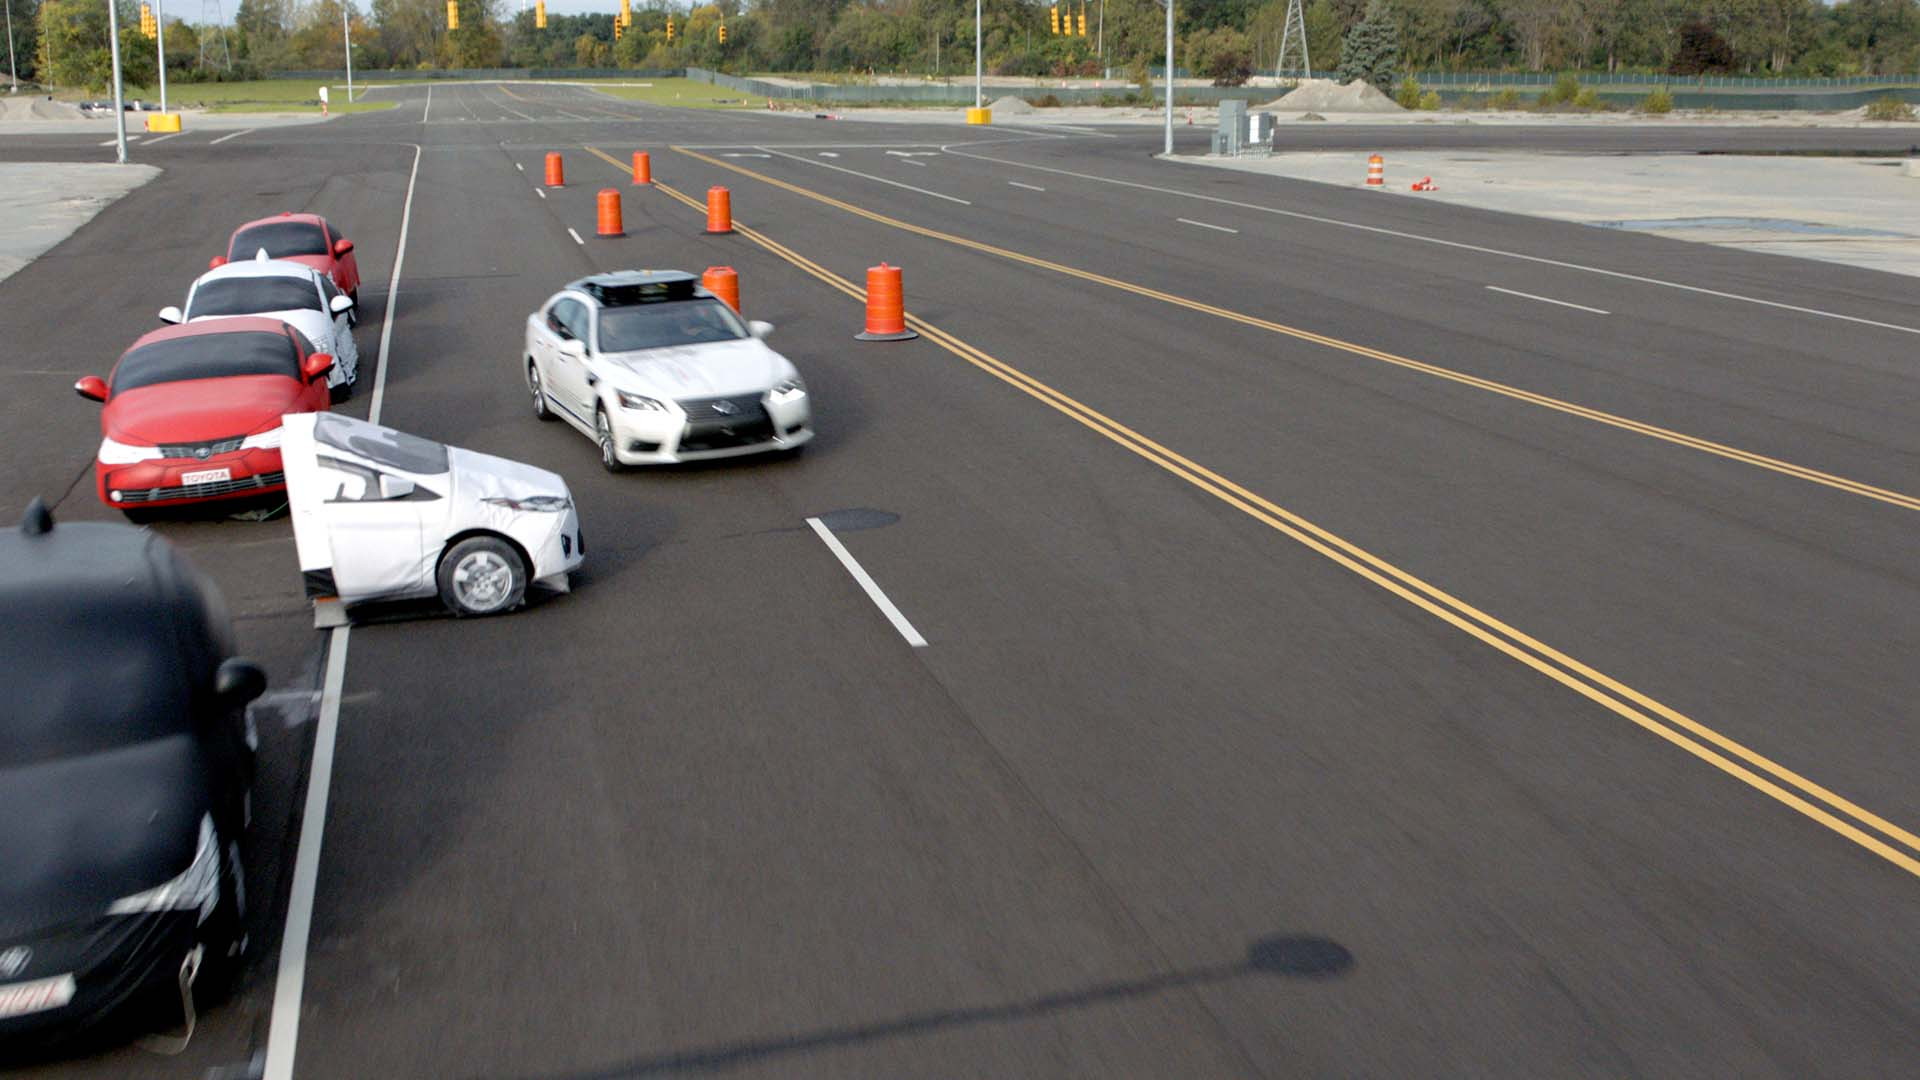 Toyota Research Institute simulation of actual 3-car crash, to test Guardian active-safety system